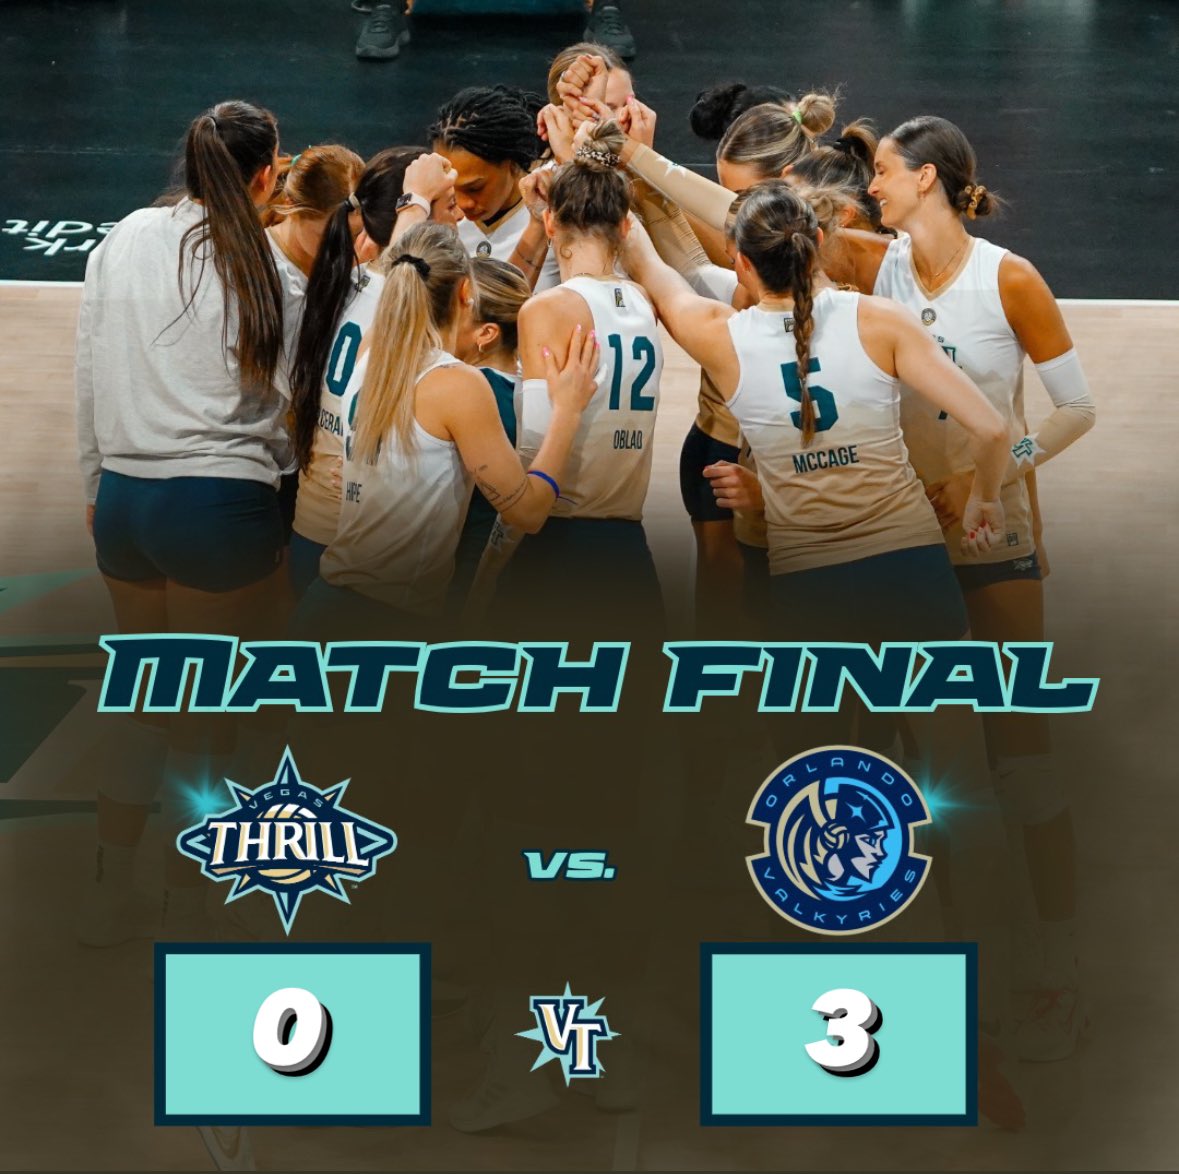 Last match final.

#JoinTheRide | #RealProVolleyball #ProVolleyball 

#volleyball  #volleyballplayer #volleyballislife #volleyballteam #volleyballlife #volleyballgame #volleyballplayers #womensvolleyball